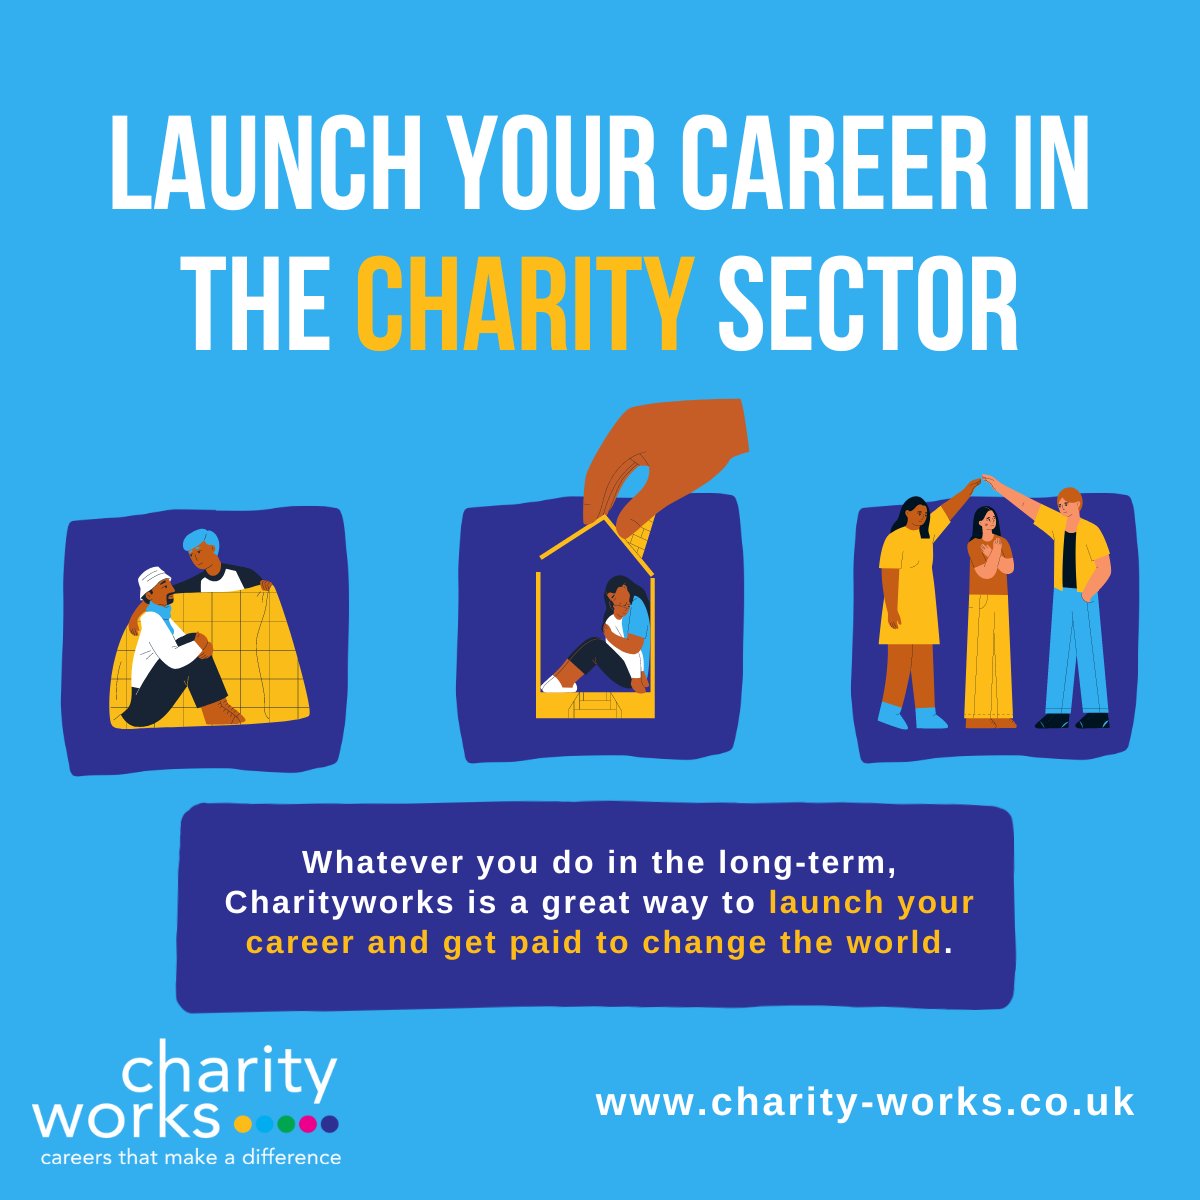 Charityworks is a 12-month talent programme where you will deliver a full-time paid job in a partner charity or housing association and have the opportunity to make a real social impact. 🤝
Applications will close at 1pm, 28 Feb 2023
Find more info and apply using our LinkTree 😊